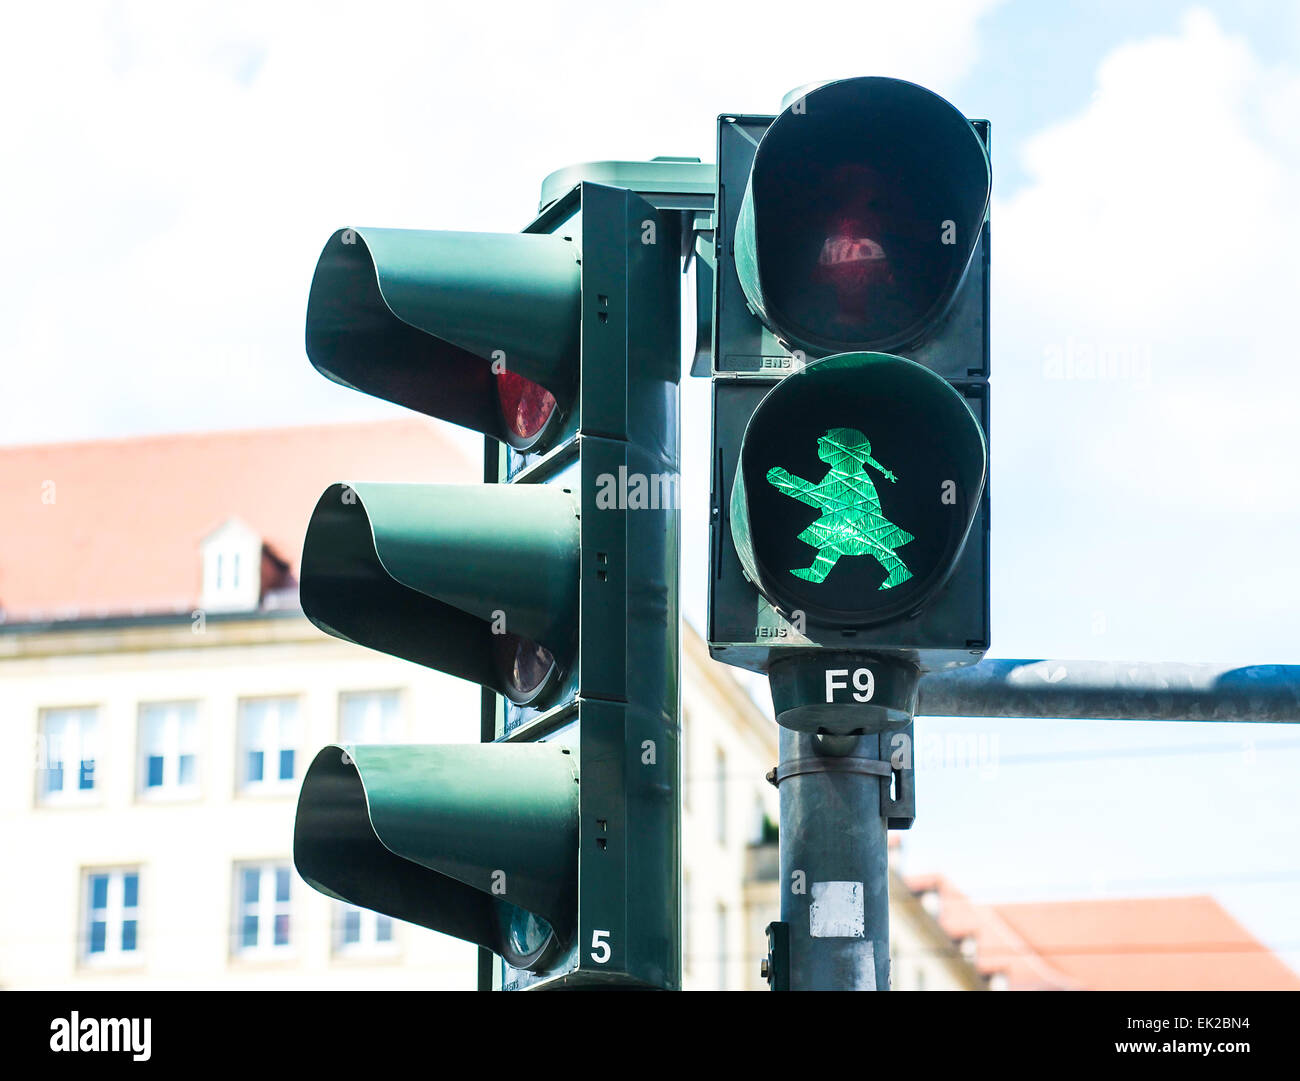 The cartoon-like figure known as Ampelfrau is seen in Dresden, Germany on the red and green pedestrian crossing lights. Stock Photo